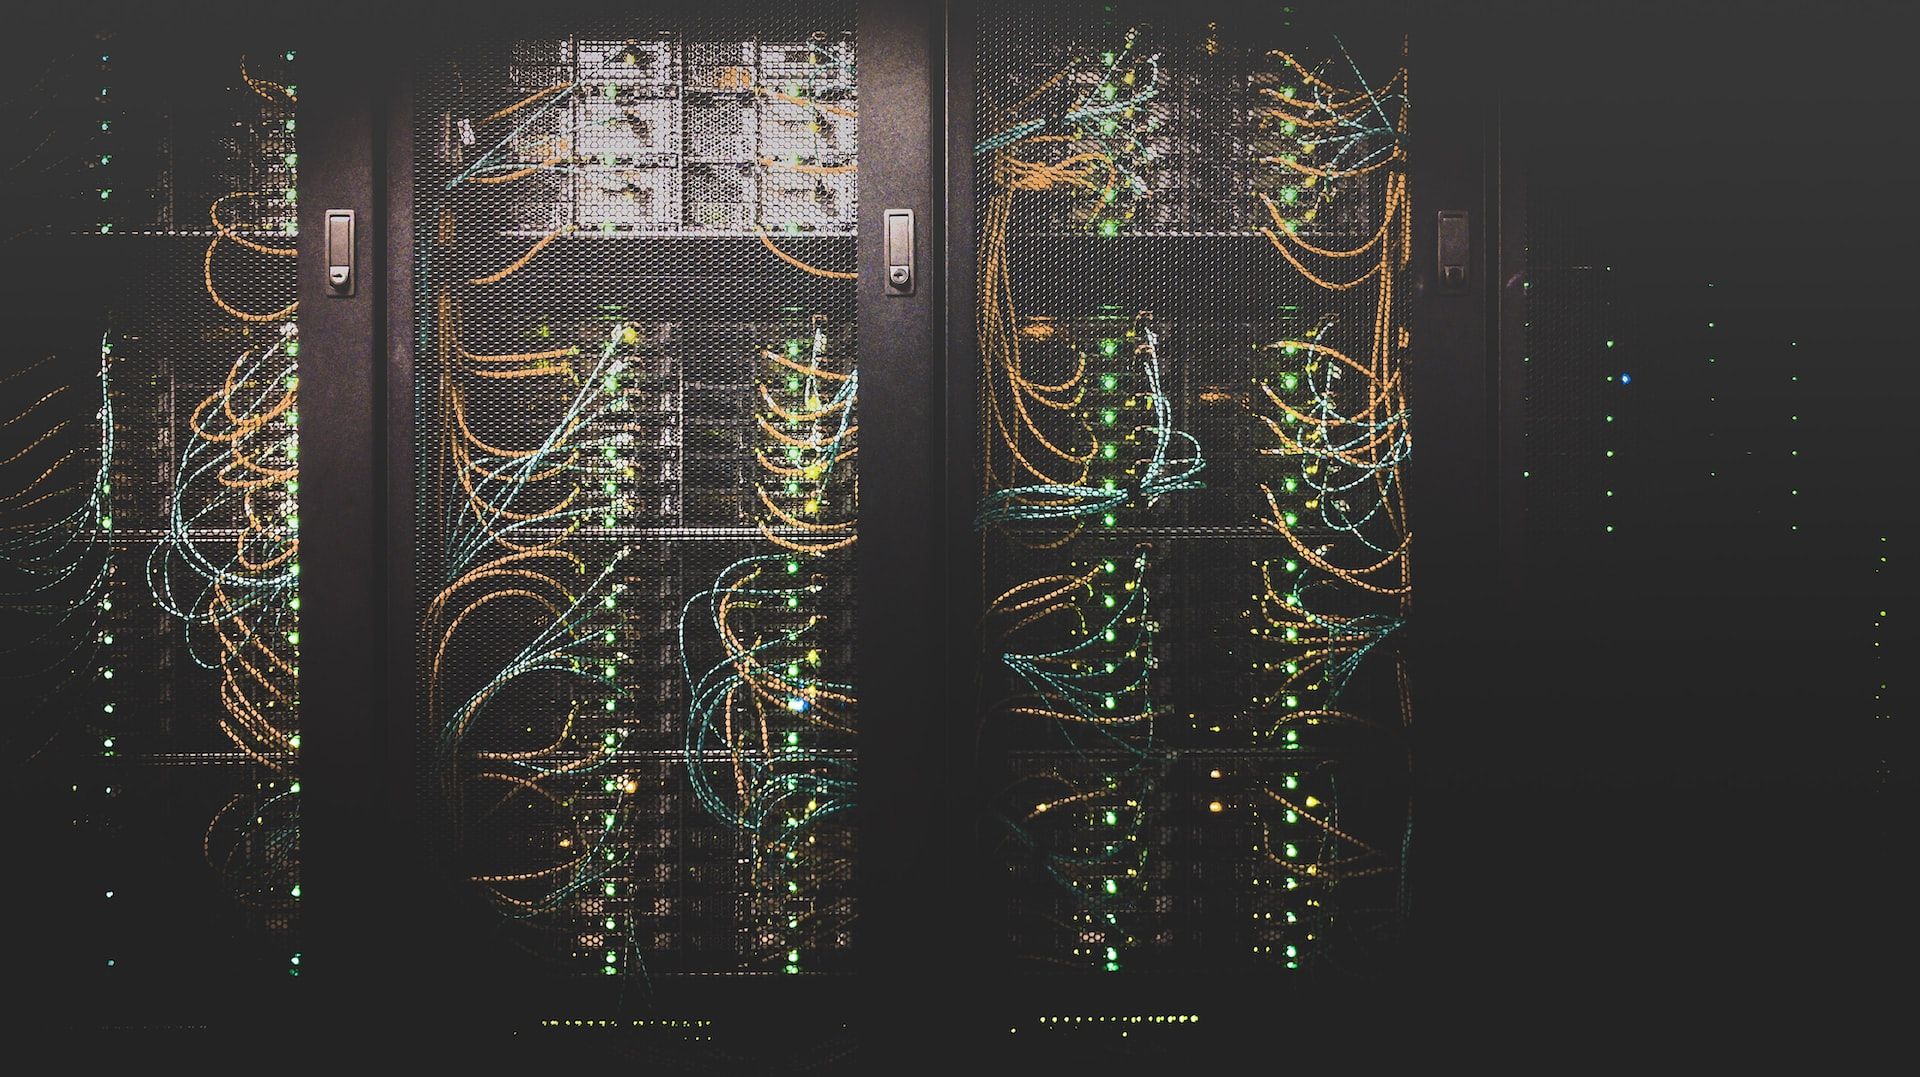 Servers behind a mesh cover